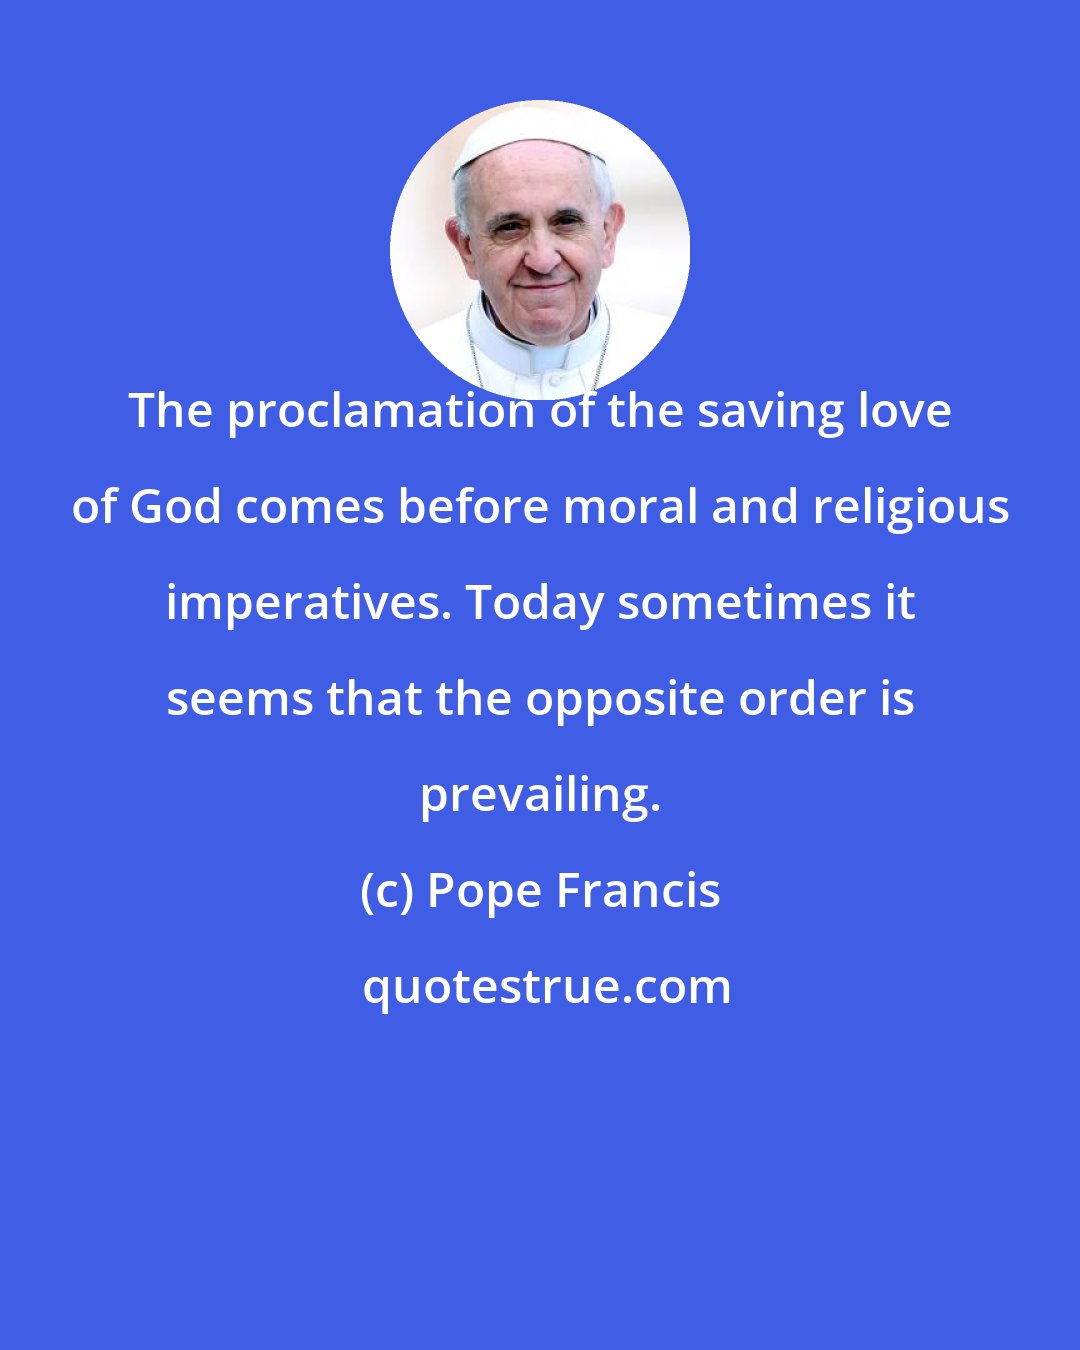 Pope Francis: The proclamation of the saving love of God comes before moral and religious imperatives. Today sometimes it seems that the opposite order is prevailing.